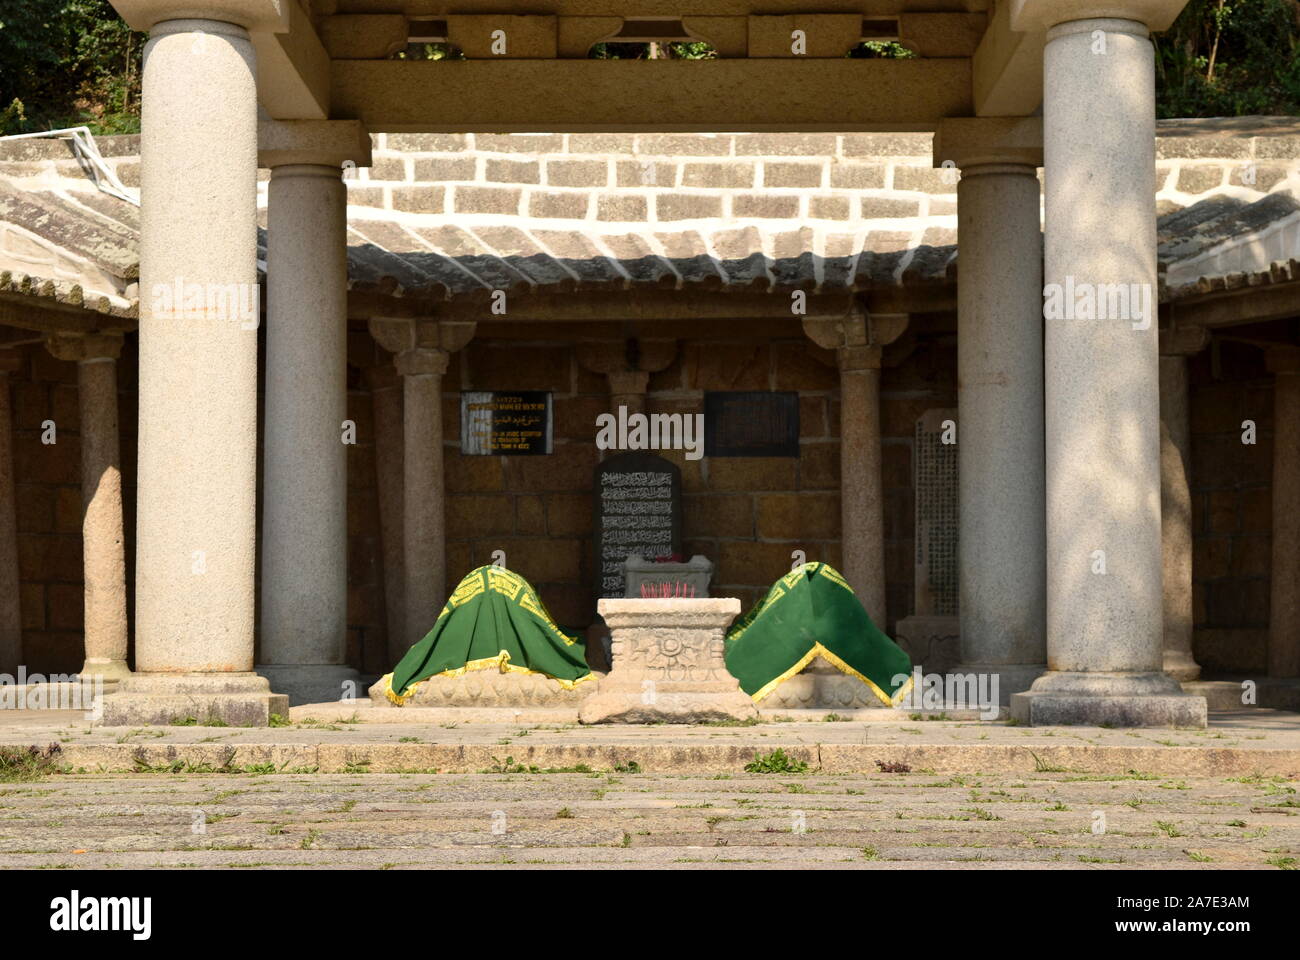 Islam in China - Ancient Islamic tombs of Prophet Mohammad's companions in Quanzhou, China Stock Photo